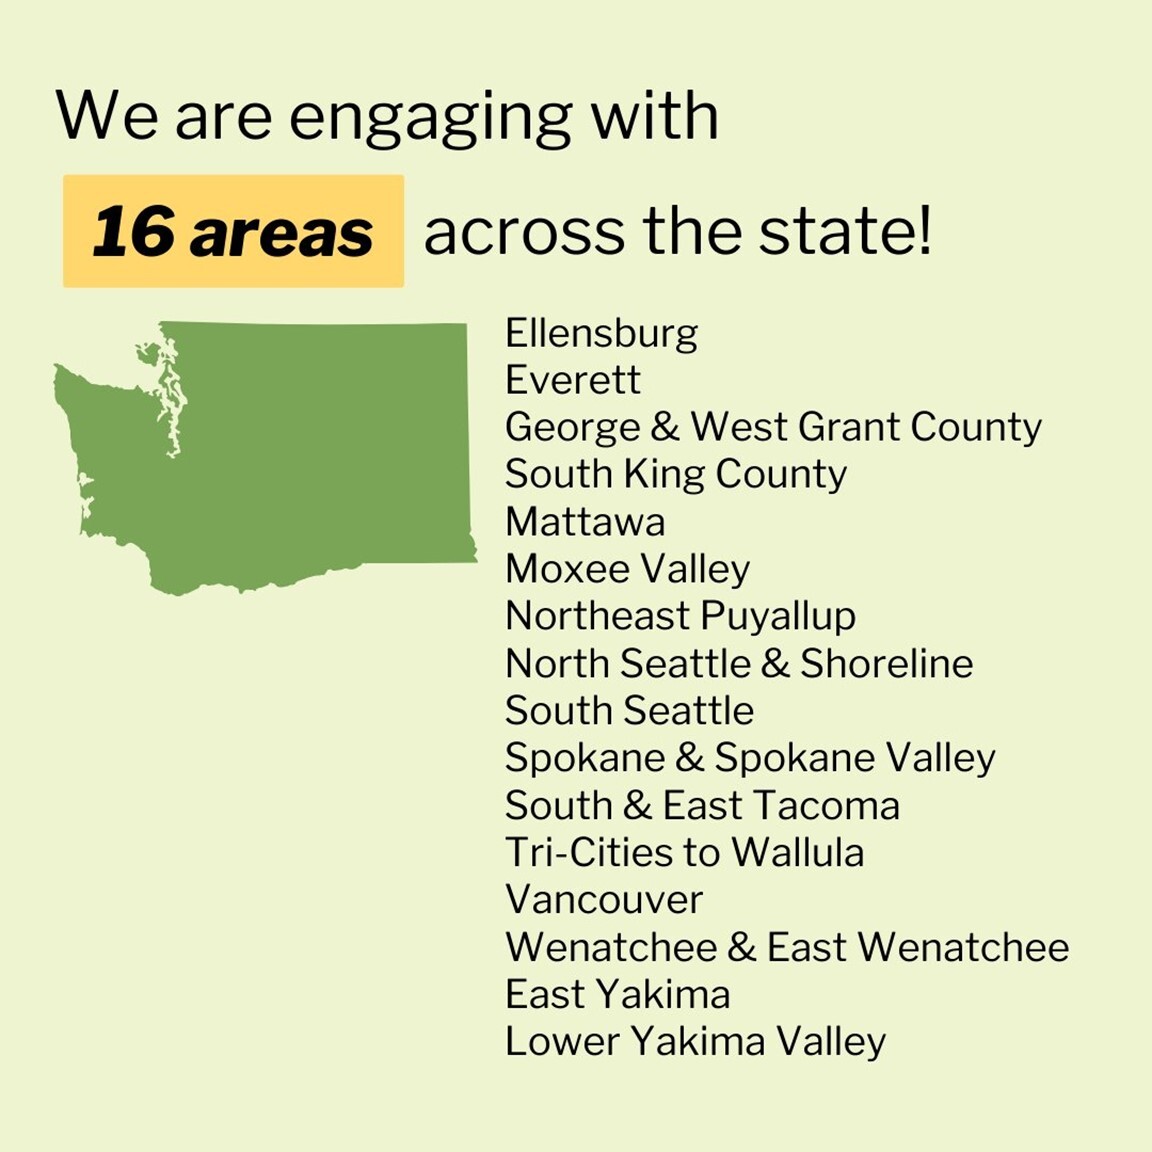 There are 16 areas defined as "overburdened by pollution" across Washington state.